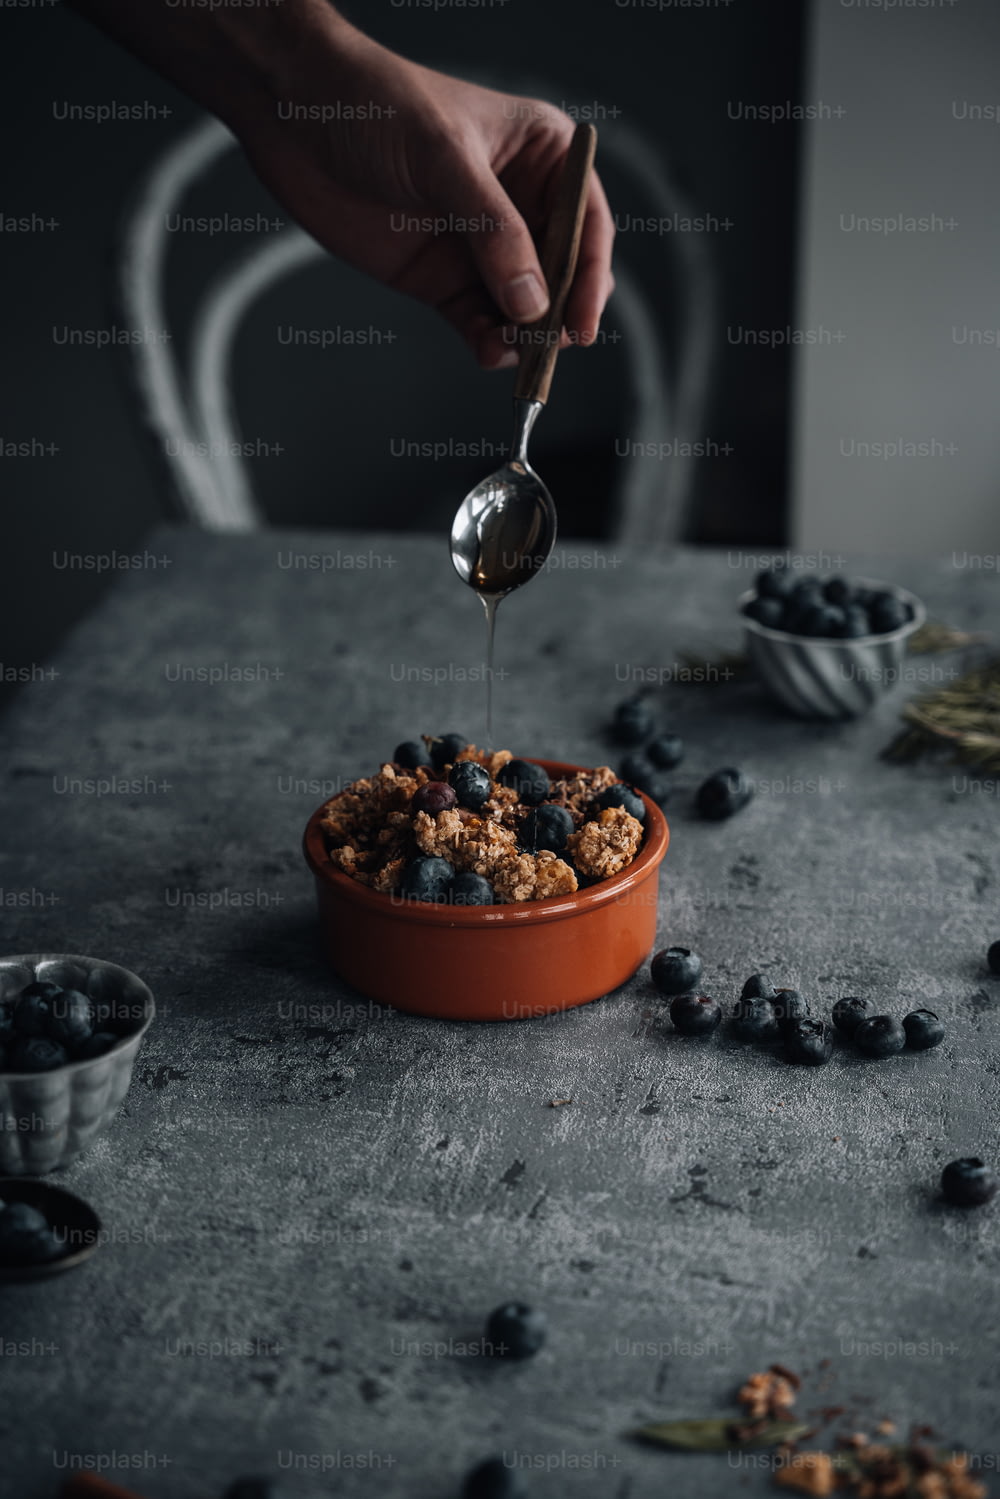 a person is spooning blueberries into a bowl